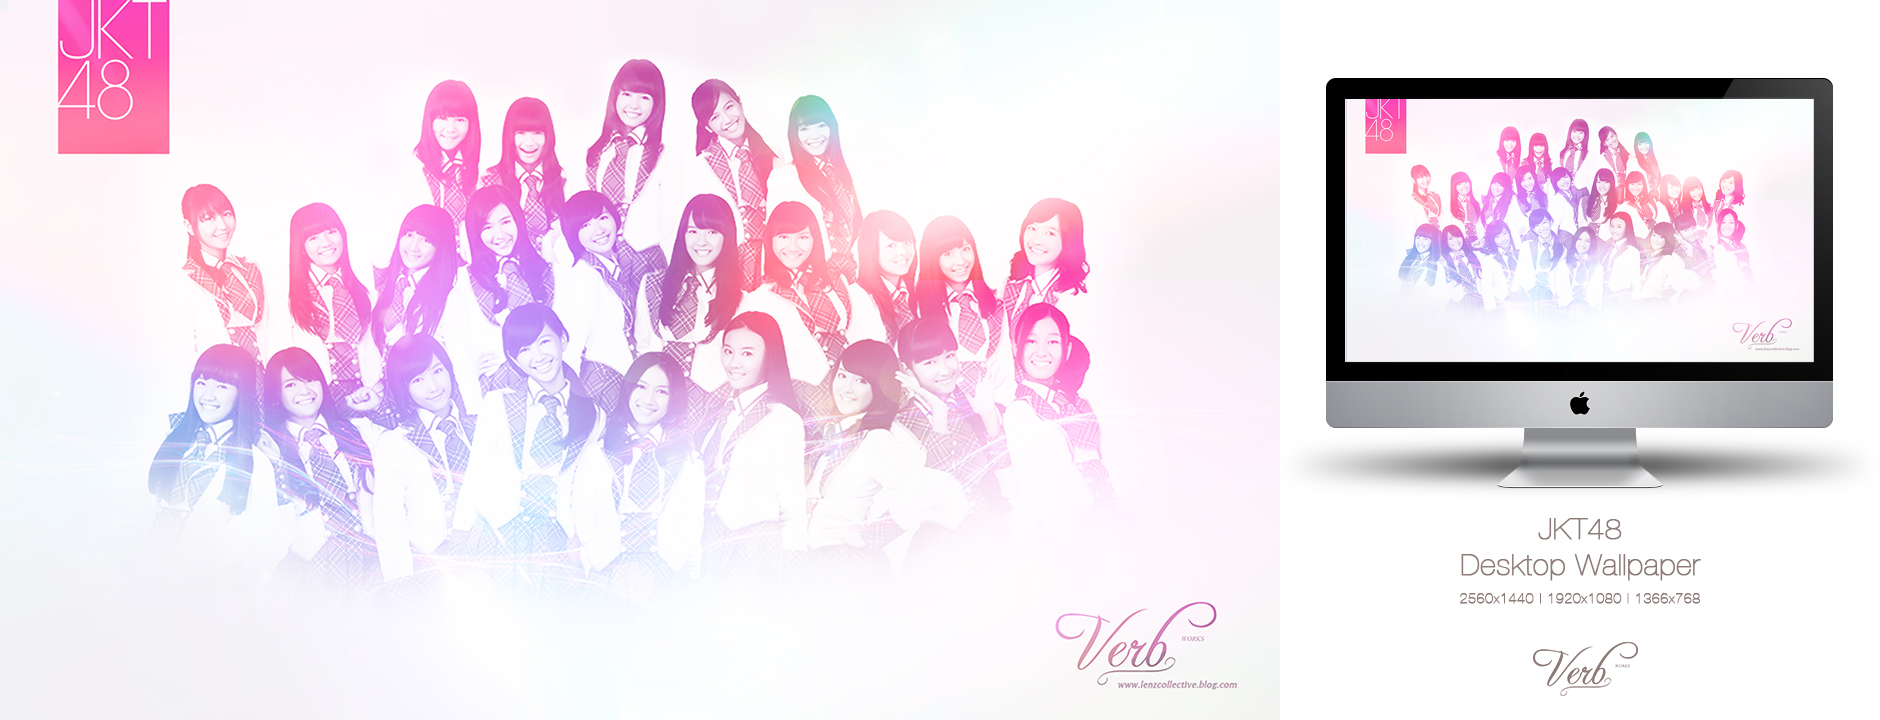 Jkt48 Wallpaper Pack By Androidlenz